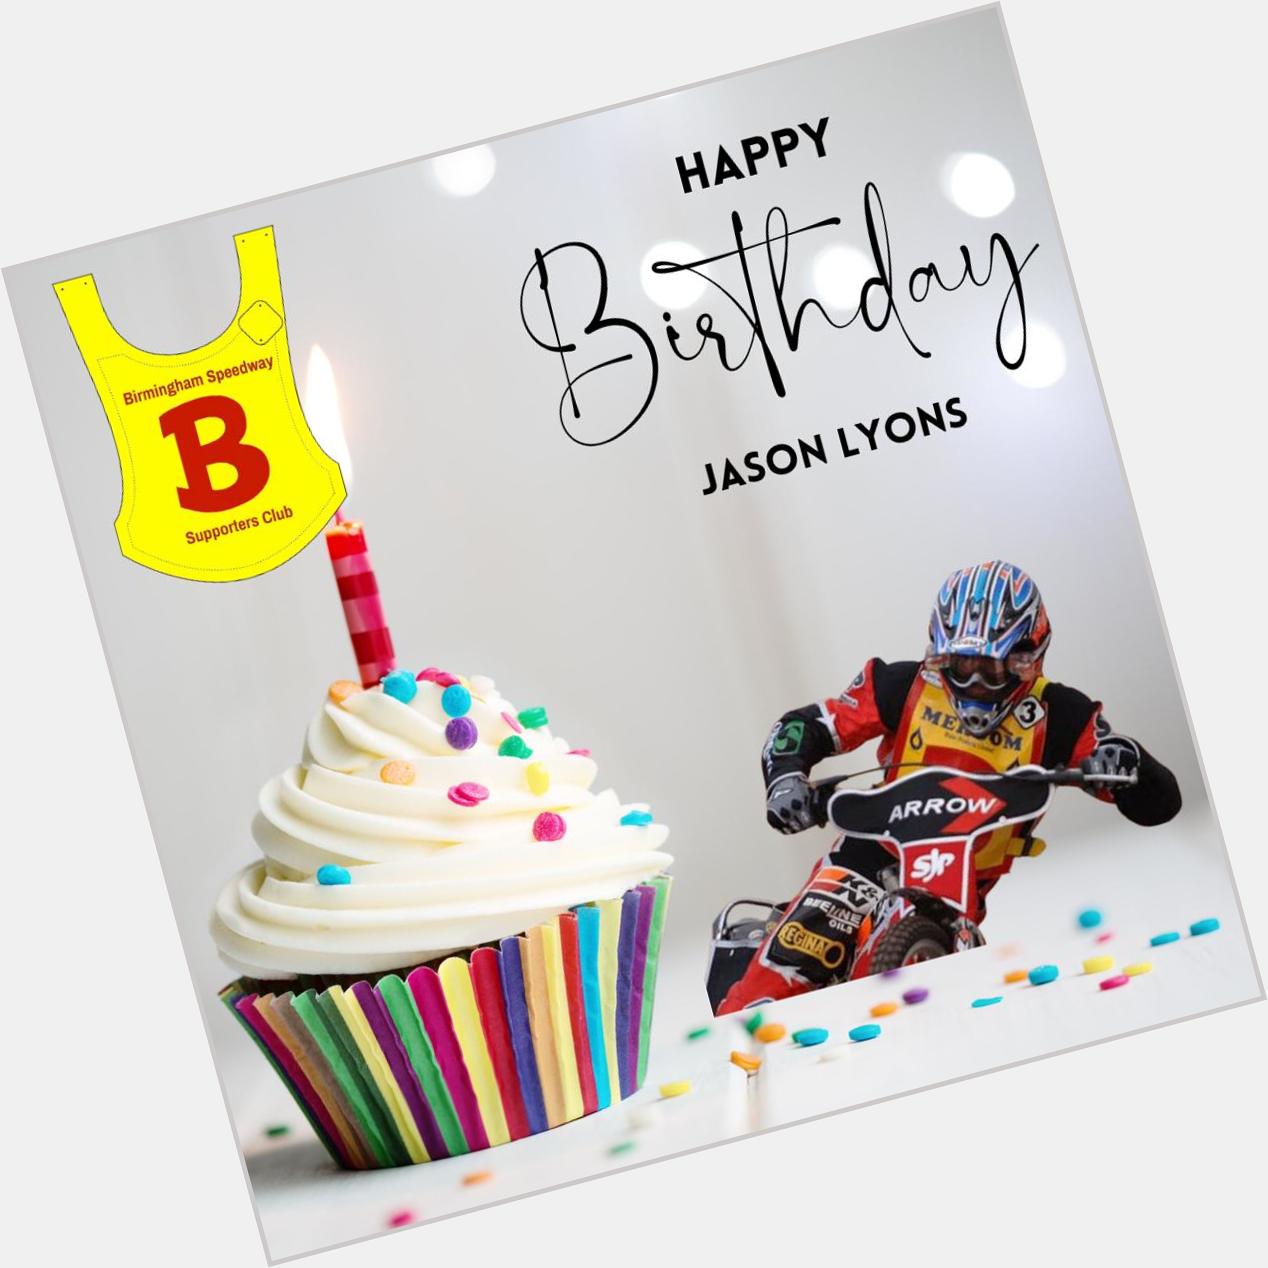 Everyone at BSSC would like to wish Brummies family member Jason Lyons a very happy birthday today.  